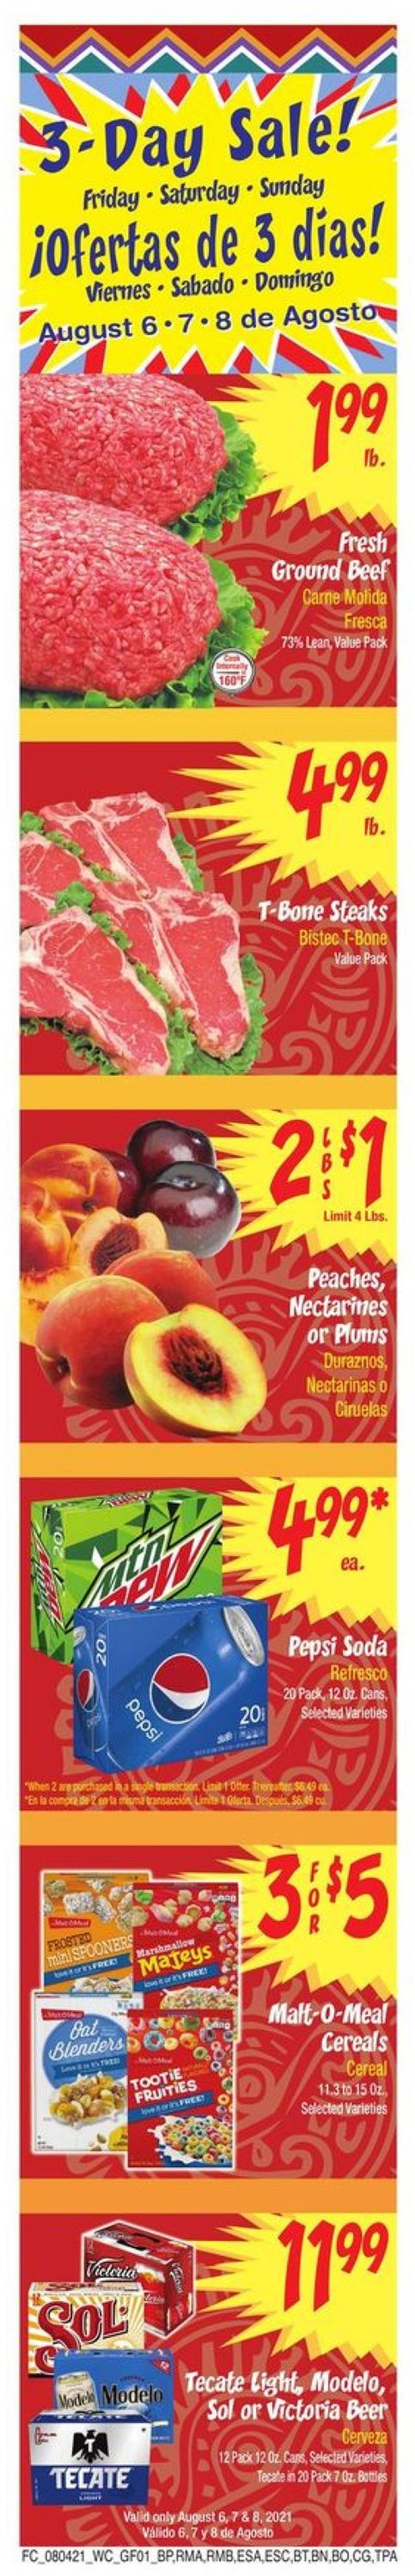 Food City Ad from 08/04/2021